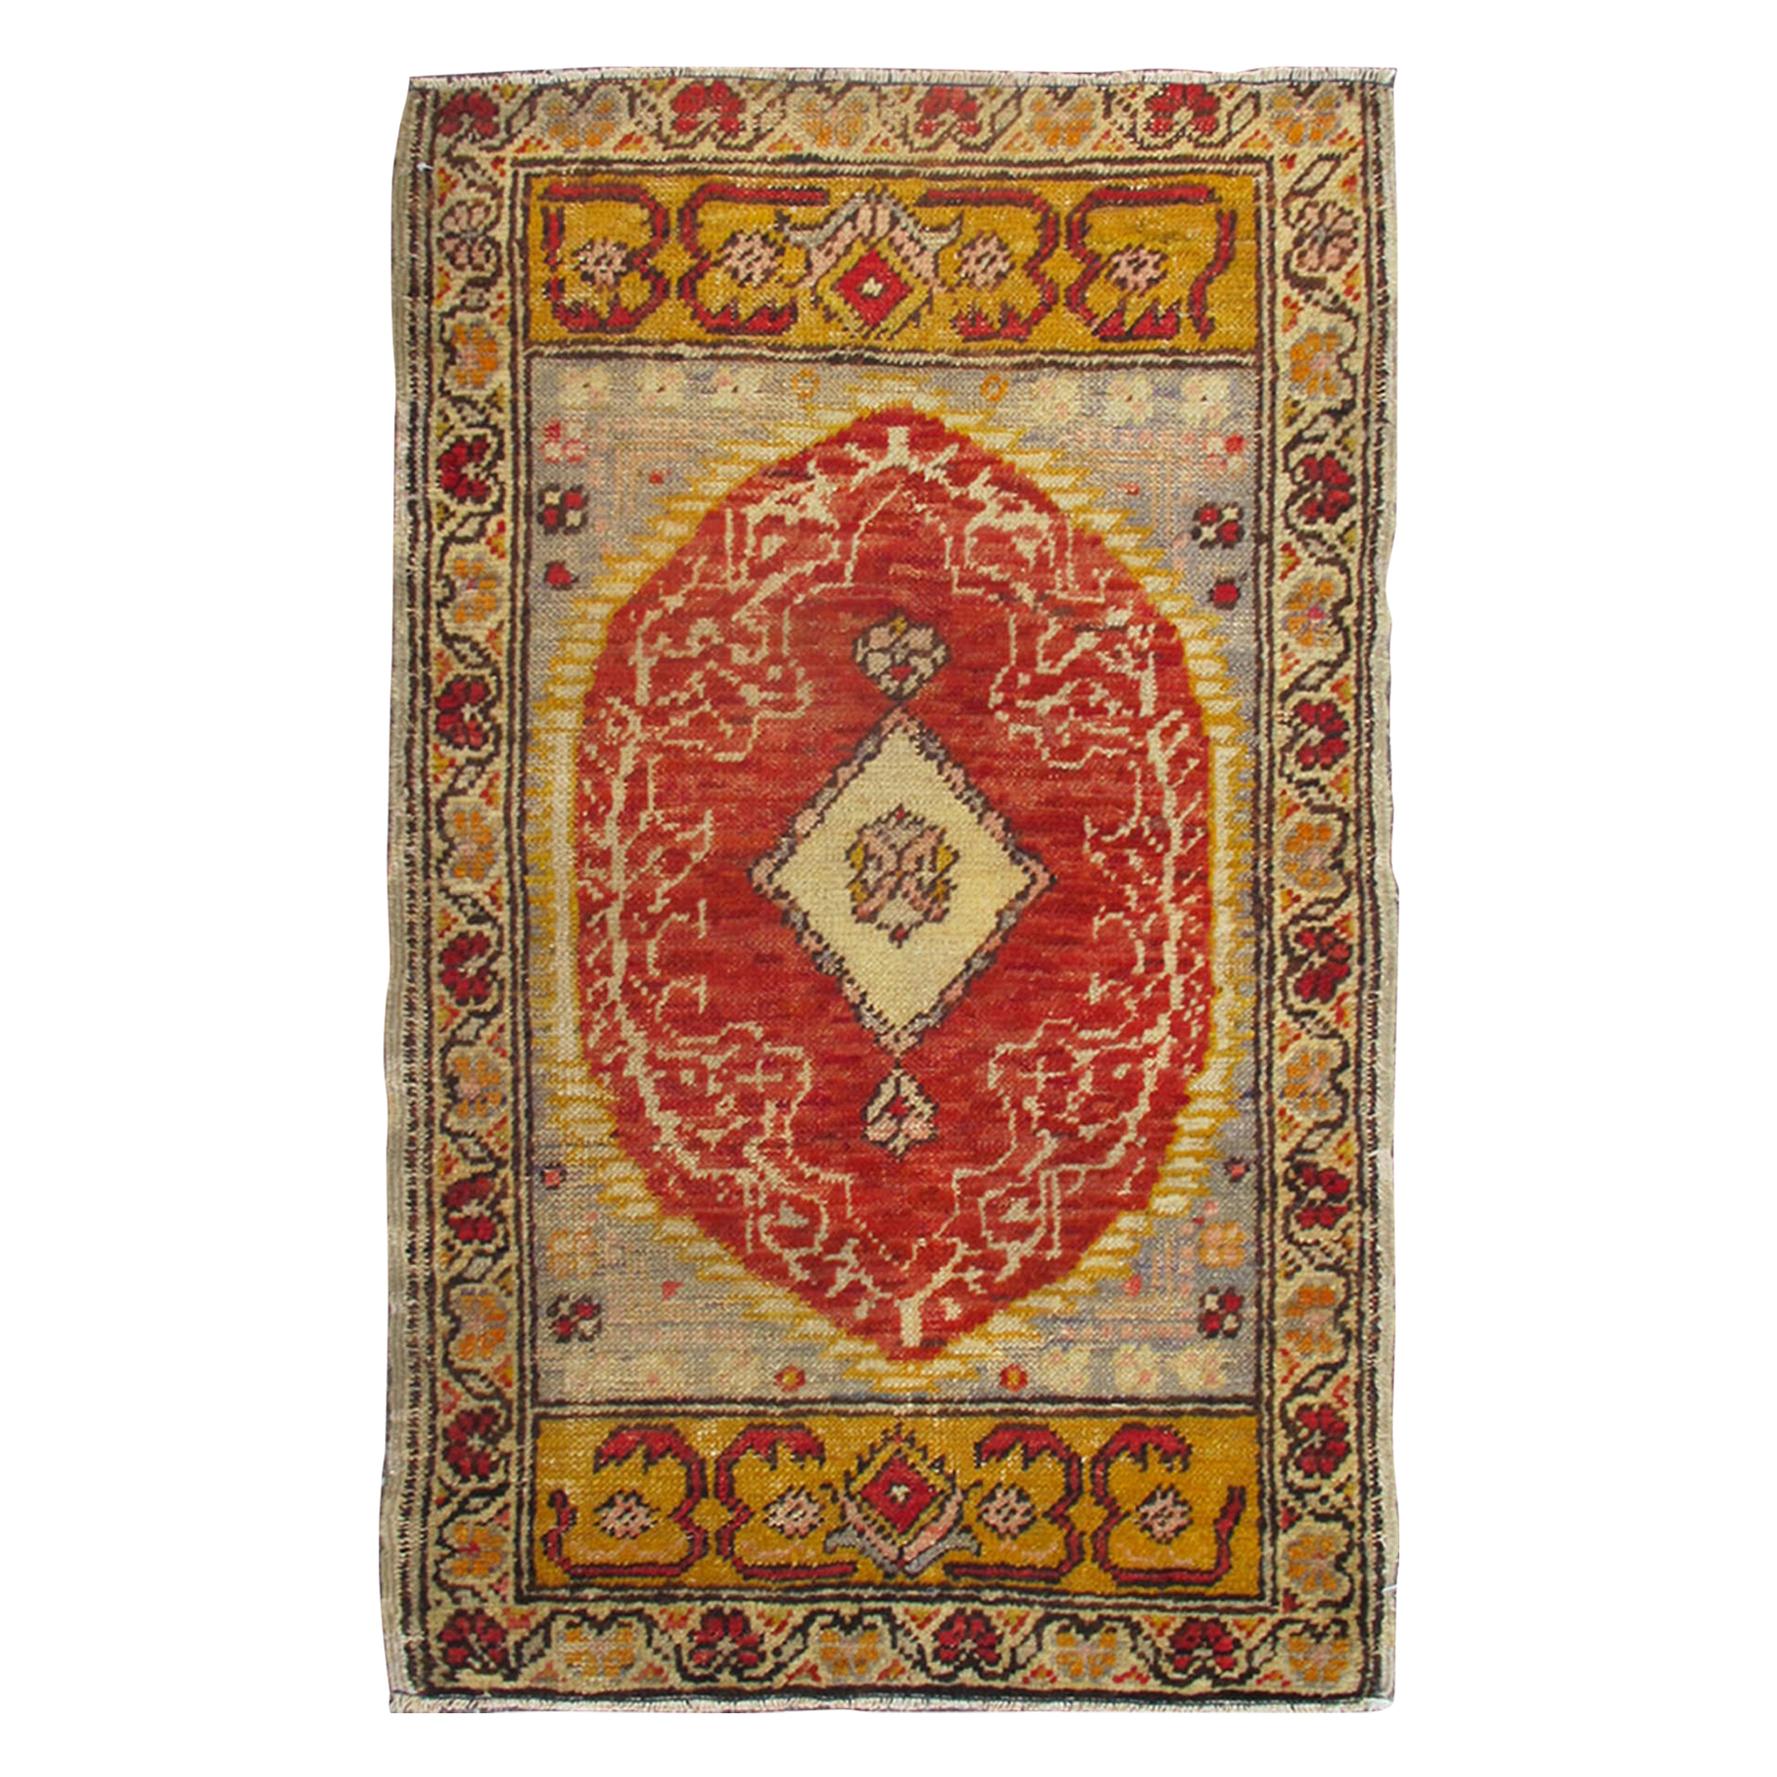 Antique Turkish Ottoman Rug with Medallion and Flowers in Yellow, Red, Gray